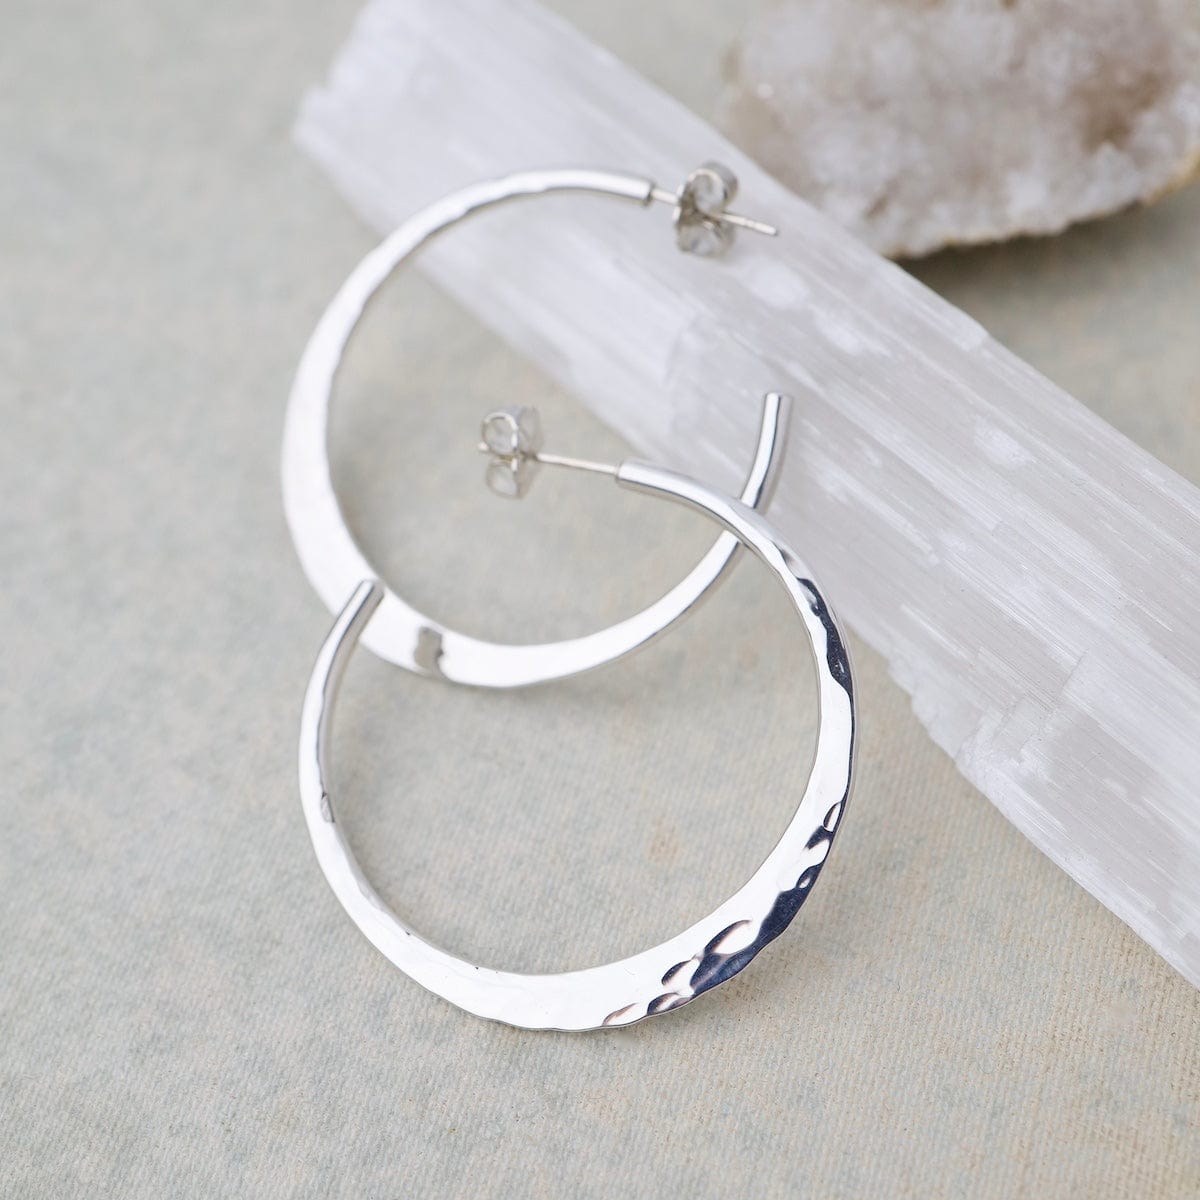 EAR EXTRA LARGE HAMMERED HOOP EARRING